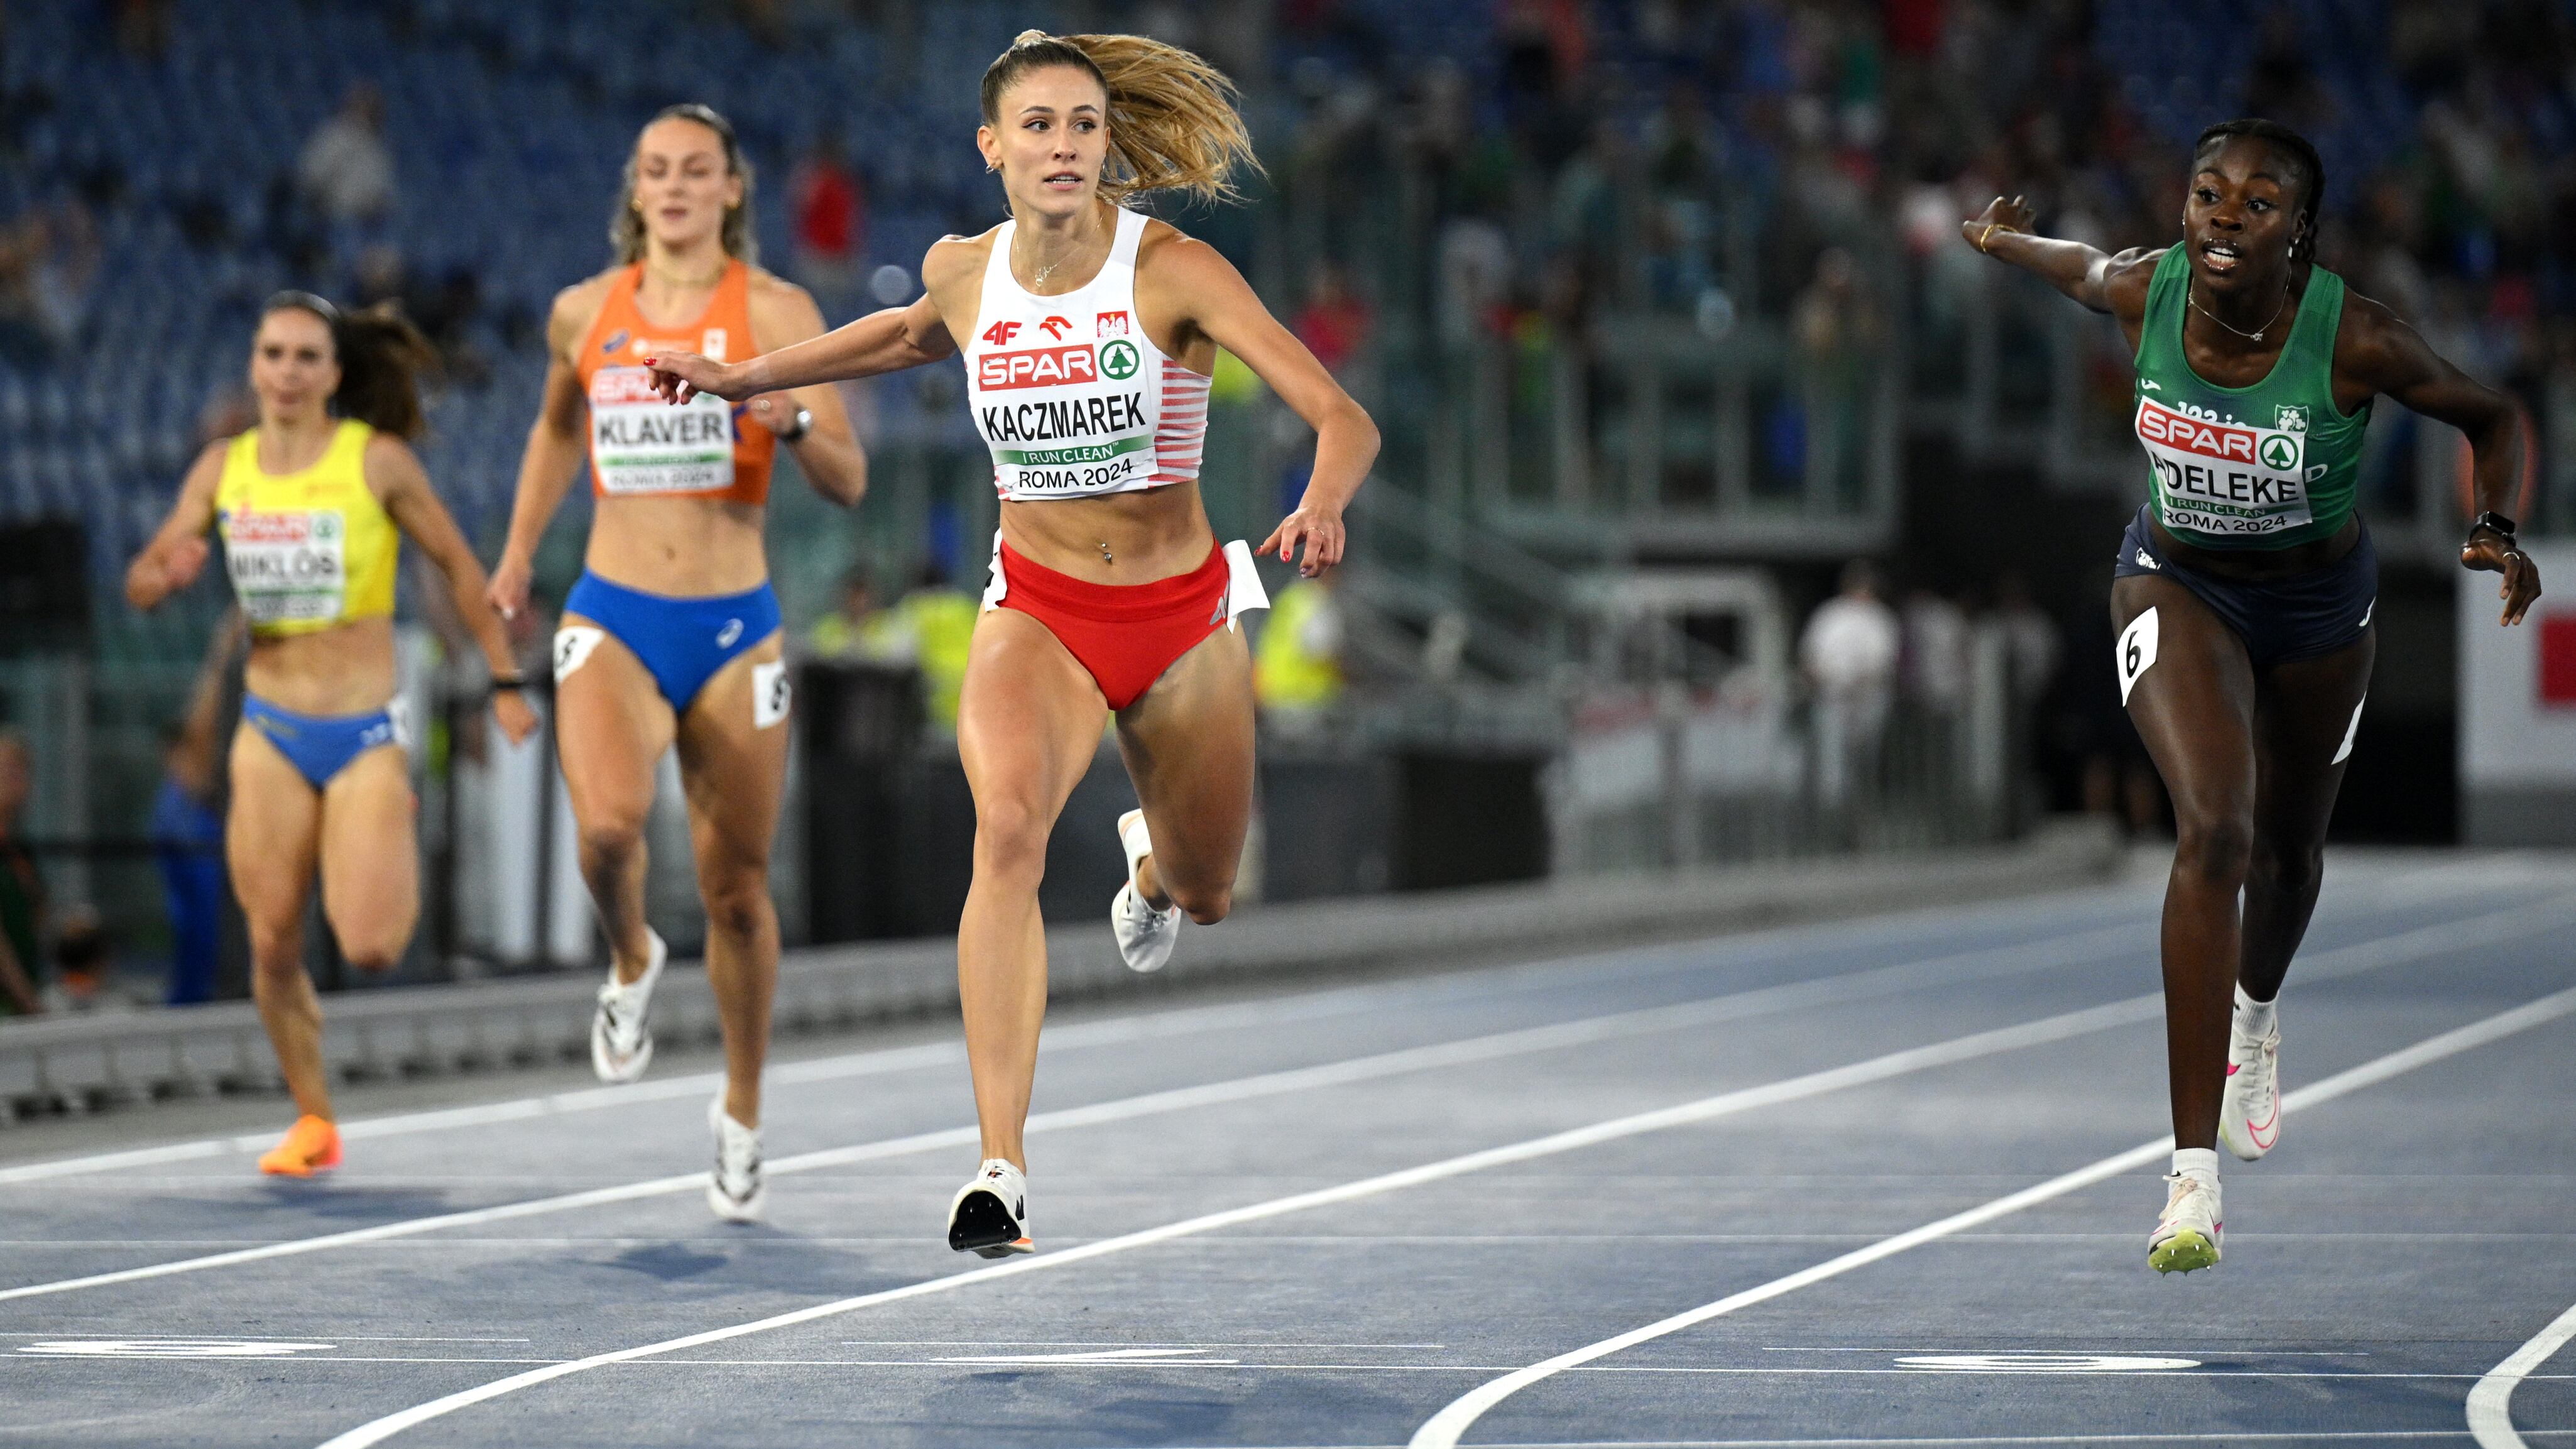 ROME, ITALY - JUNE 10: Gold medallist, Natalia Kaczmarek of Team Poland, crosses the finish line ahead of silver medallist,  Rhasidat Adeleke of Team Ireland and bronze medallist, Lieke Klaver of Team Netherlands to win in the Women's 400m Final on day four of the 26th European Athletics Championships - Rome 2024 at Stadio Olimpico on June 10, 2024 in Rome, Italy.  (Photo by Matthias Hangst/Getty Images)